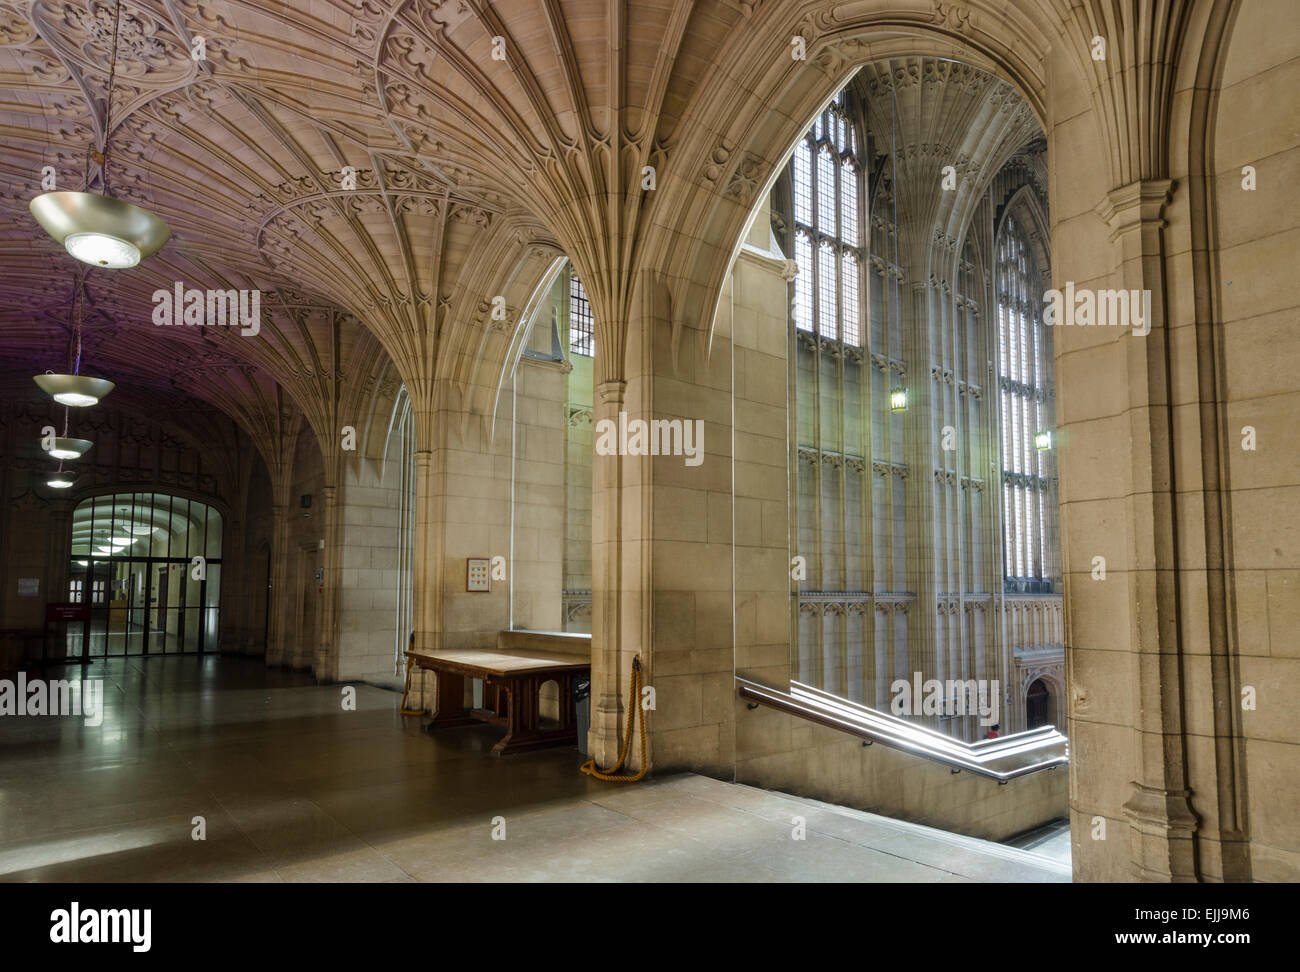 Interior of the Wills Memorial Building, iconic building of the University of Bristol. Stock Photo